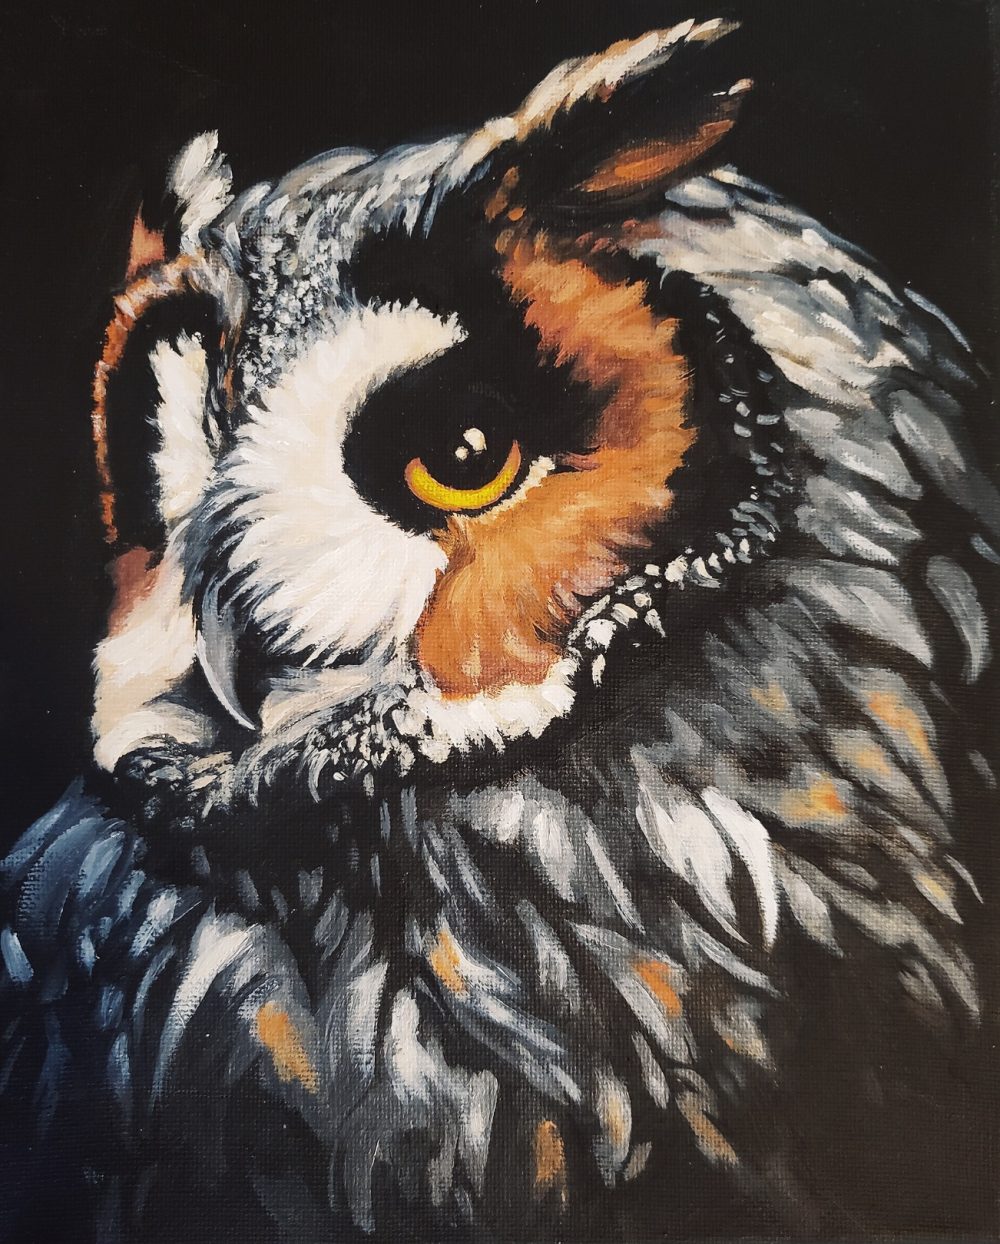 A painting depicting a great horned owl with its head turned right so that its gold left eye stares directly at the viewer.